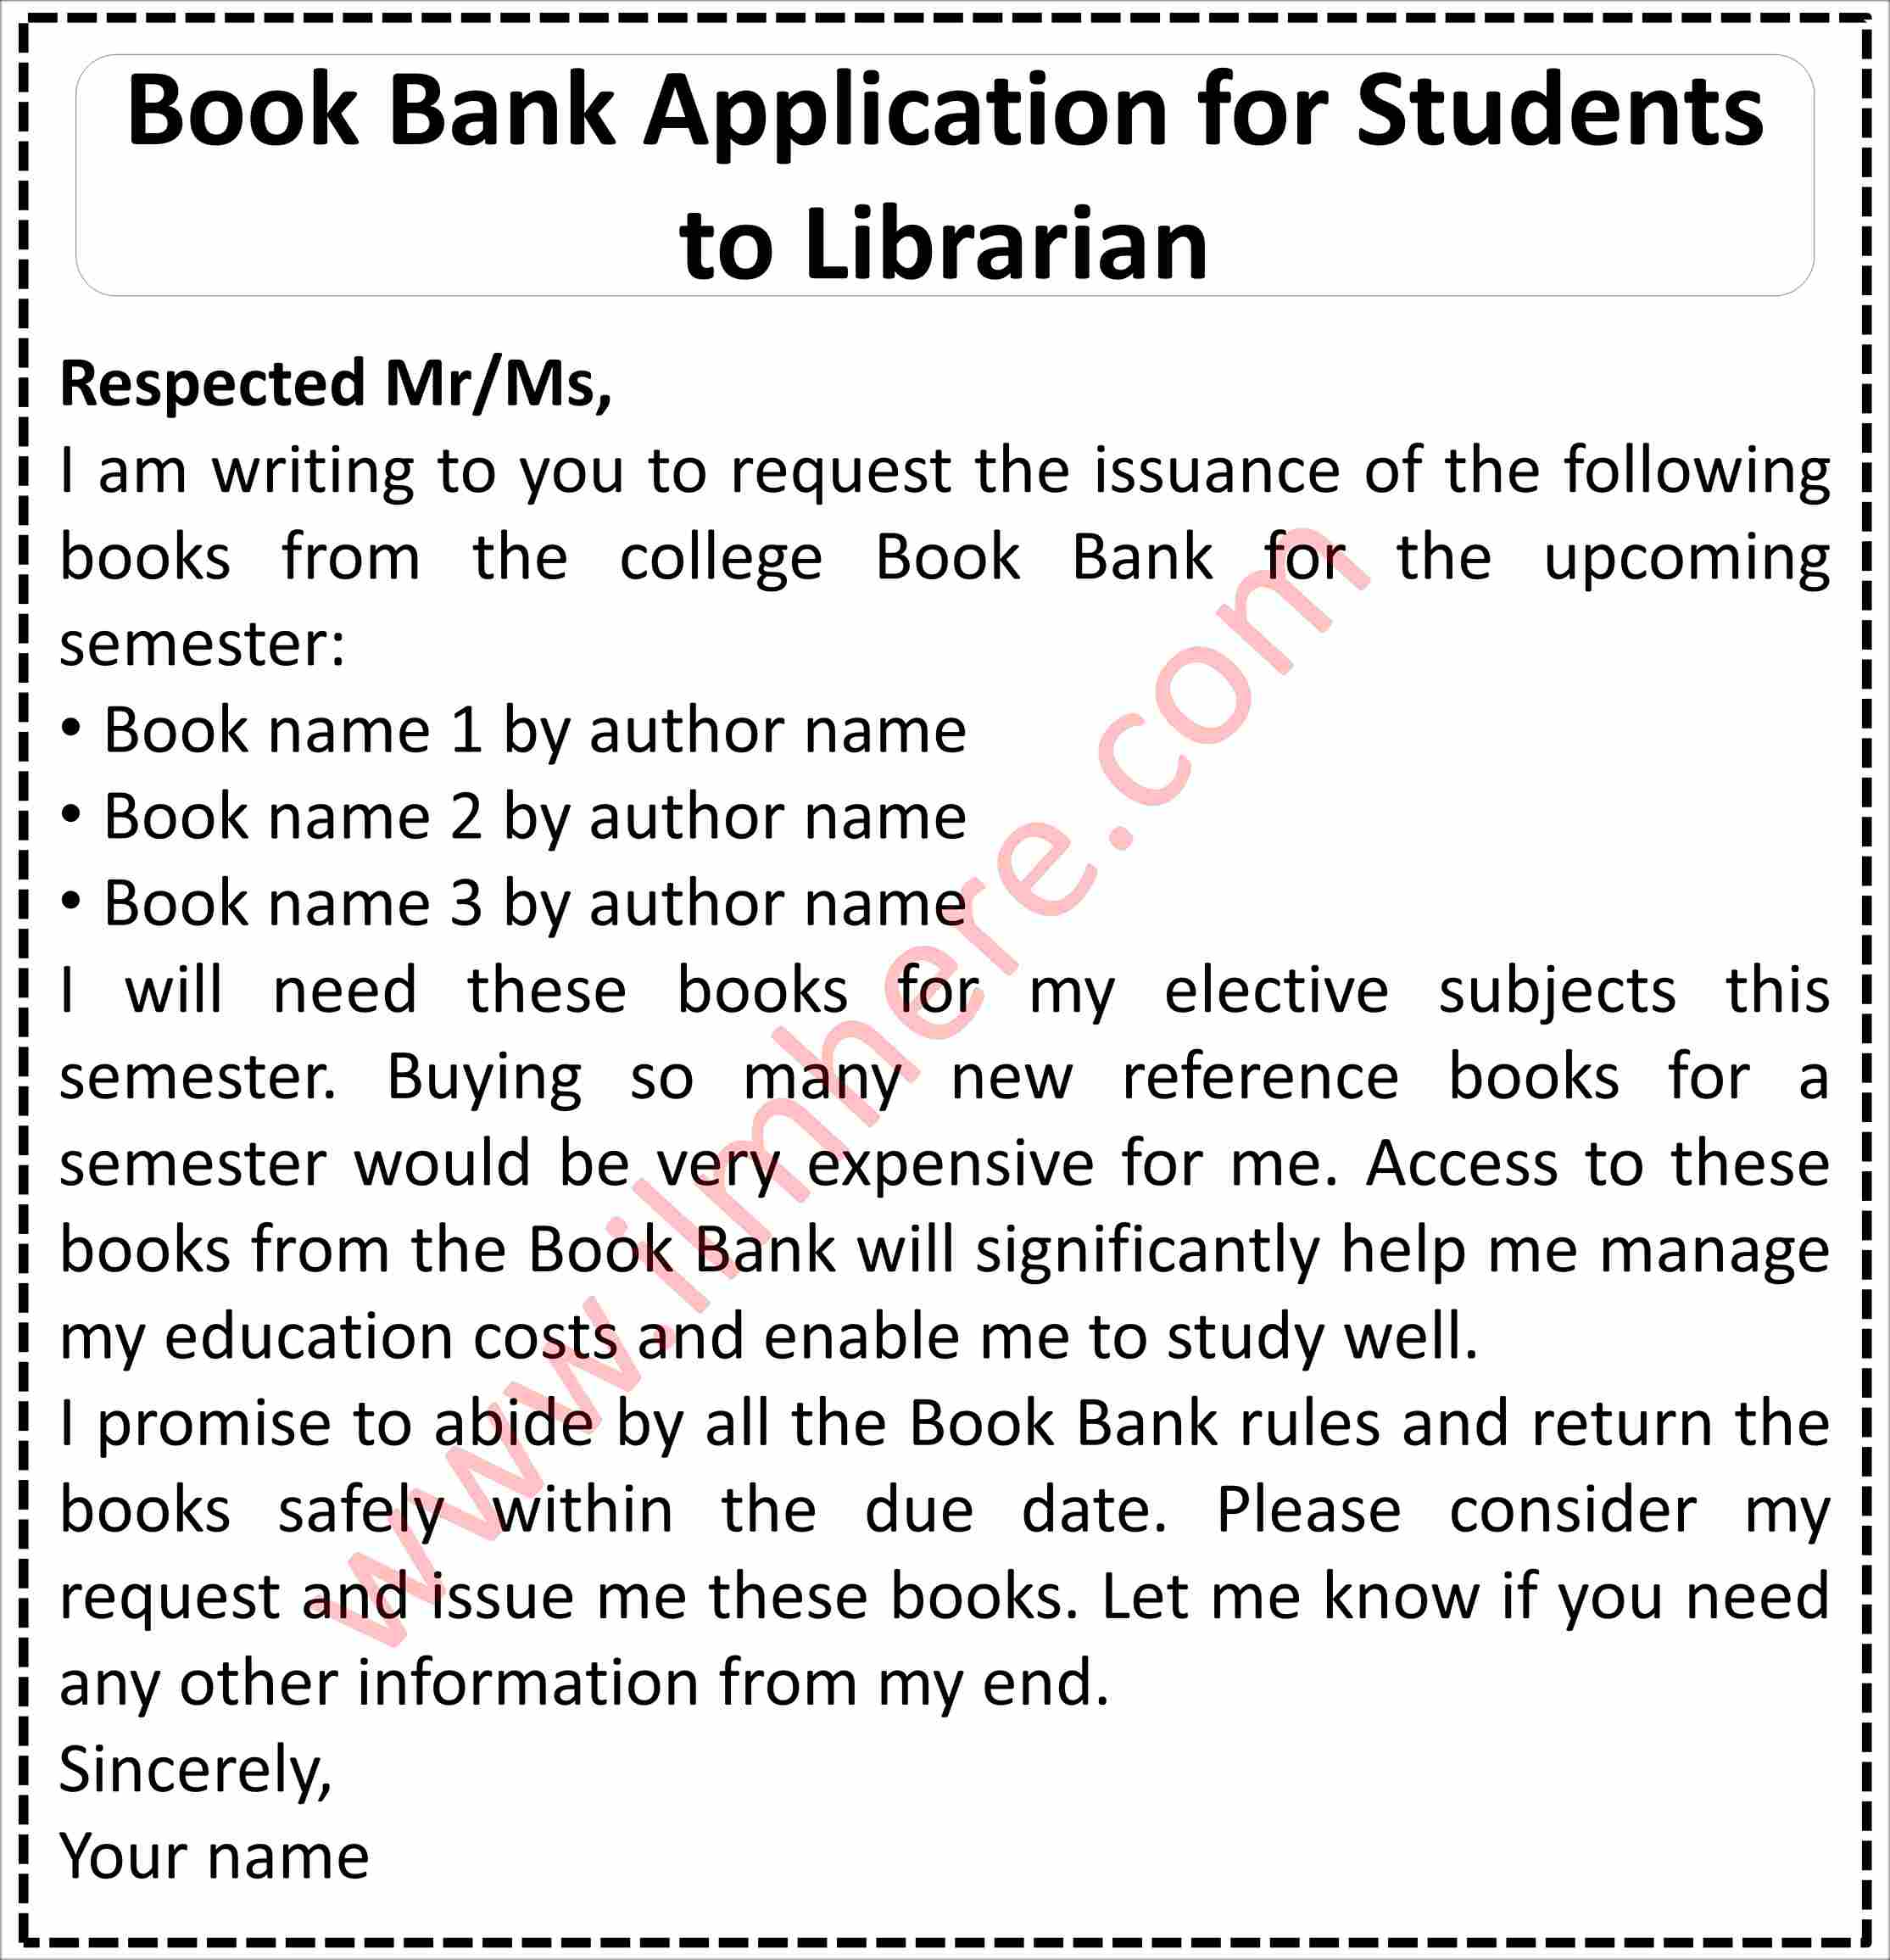 Book Bank Application for Students to Librarian